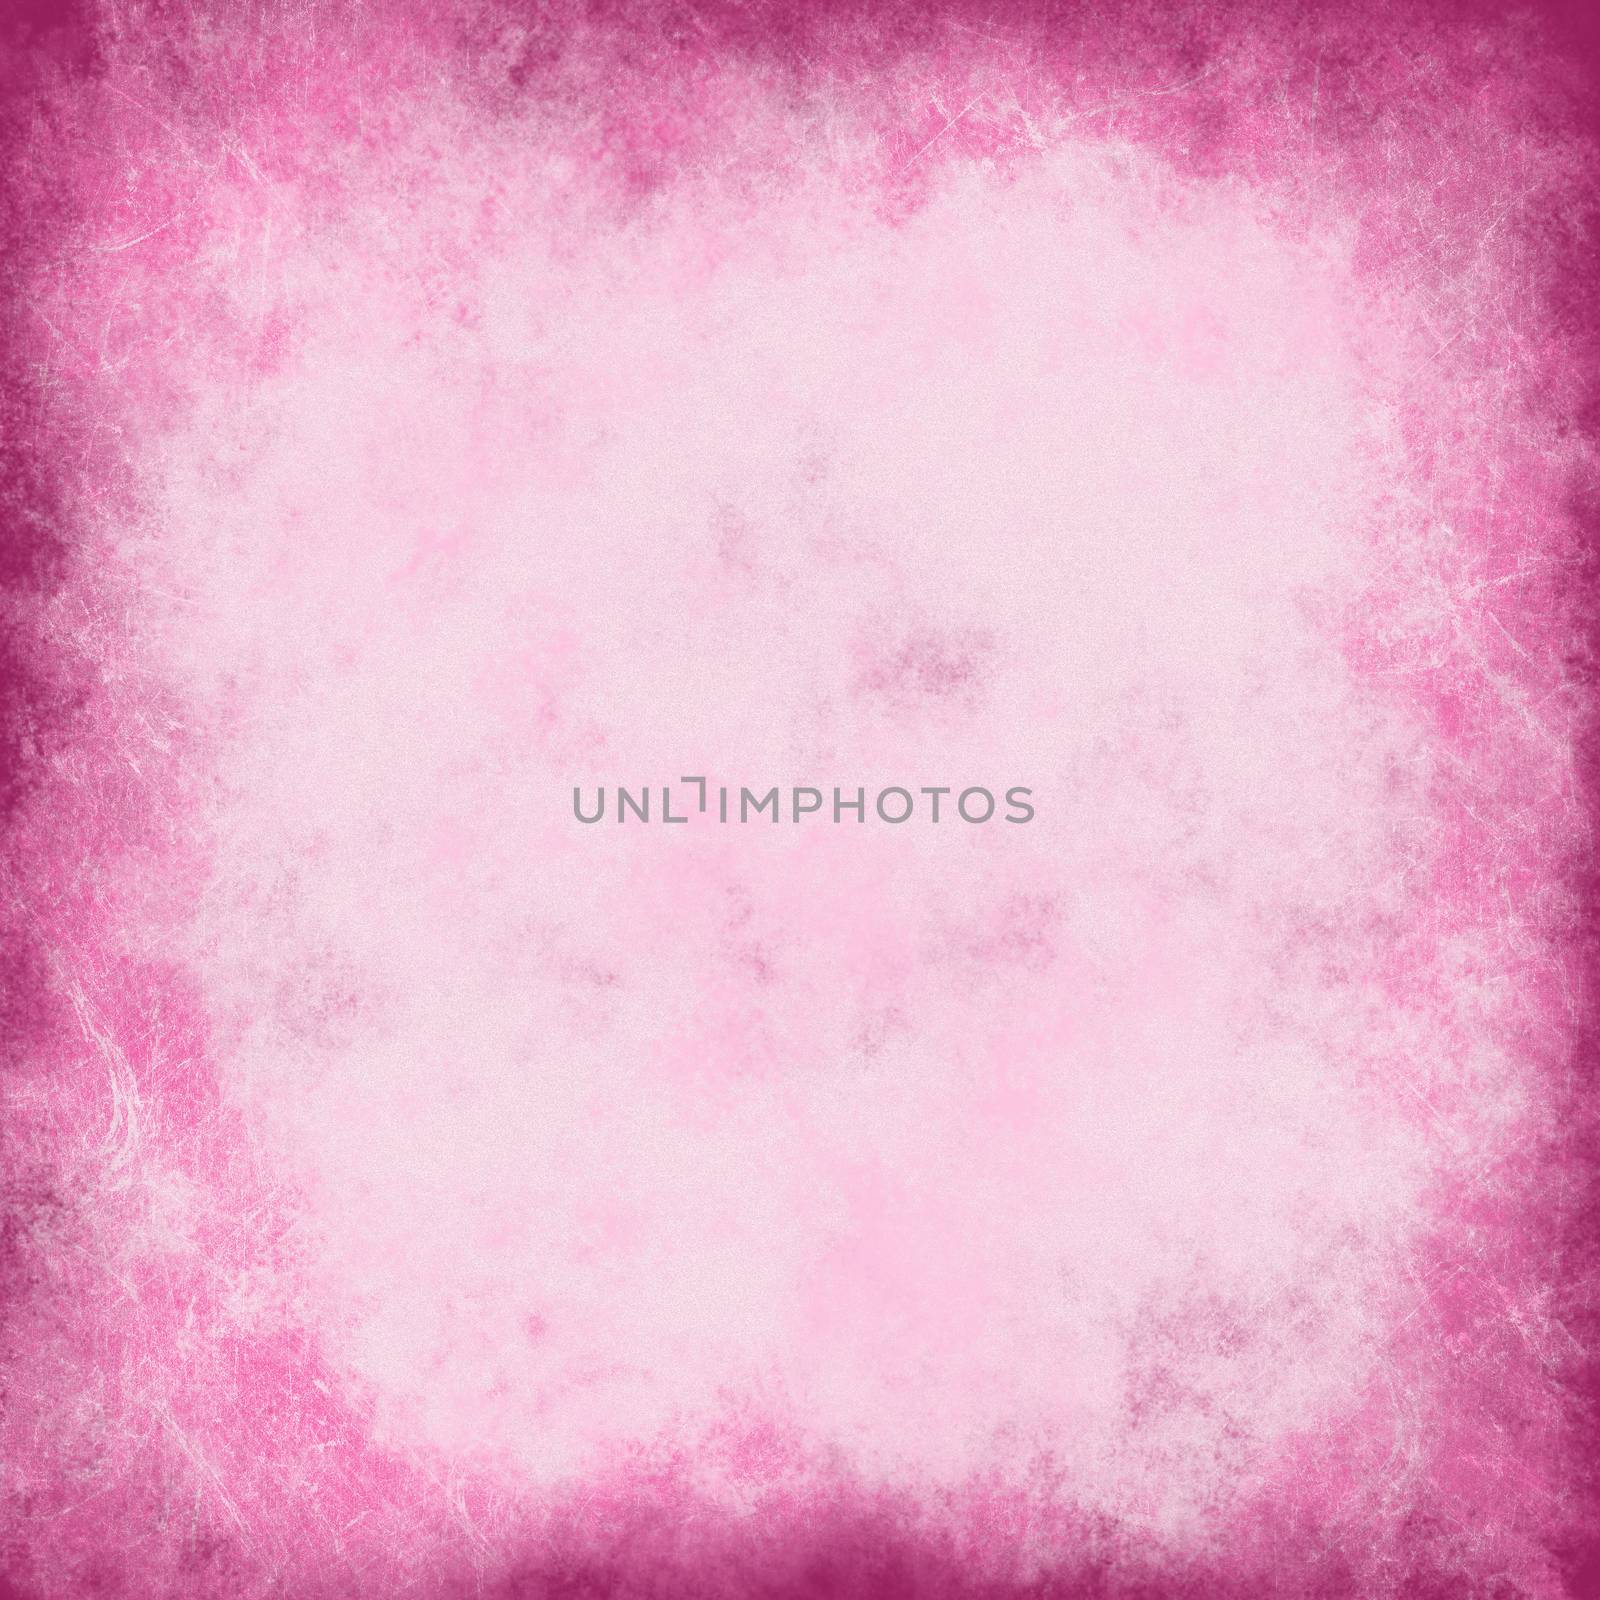 the image background of the pink paper